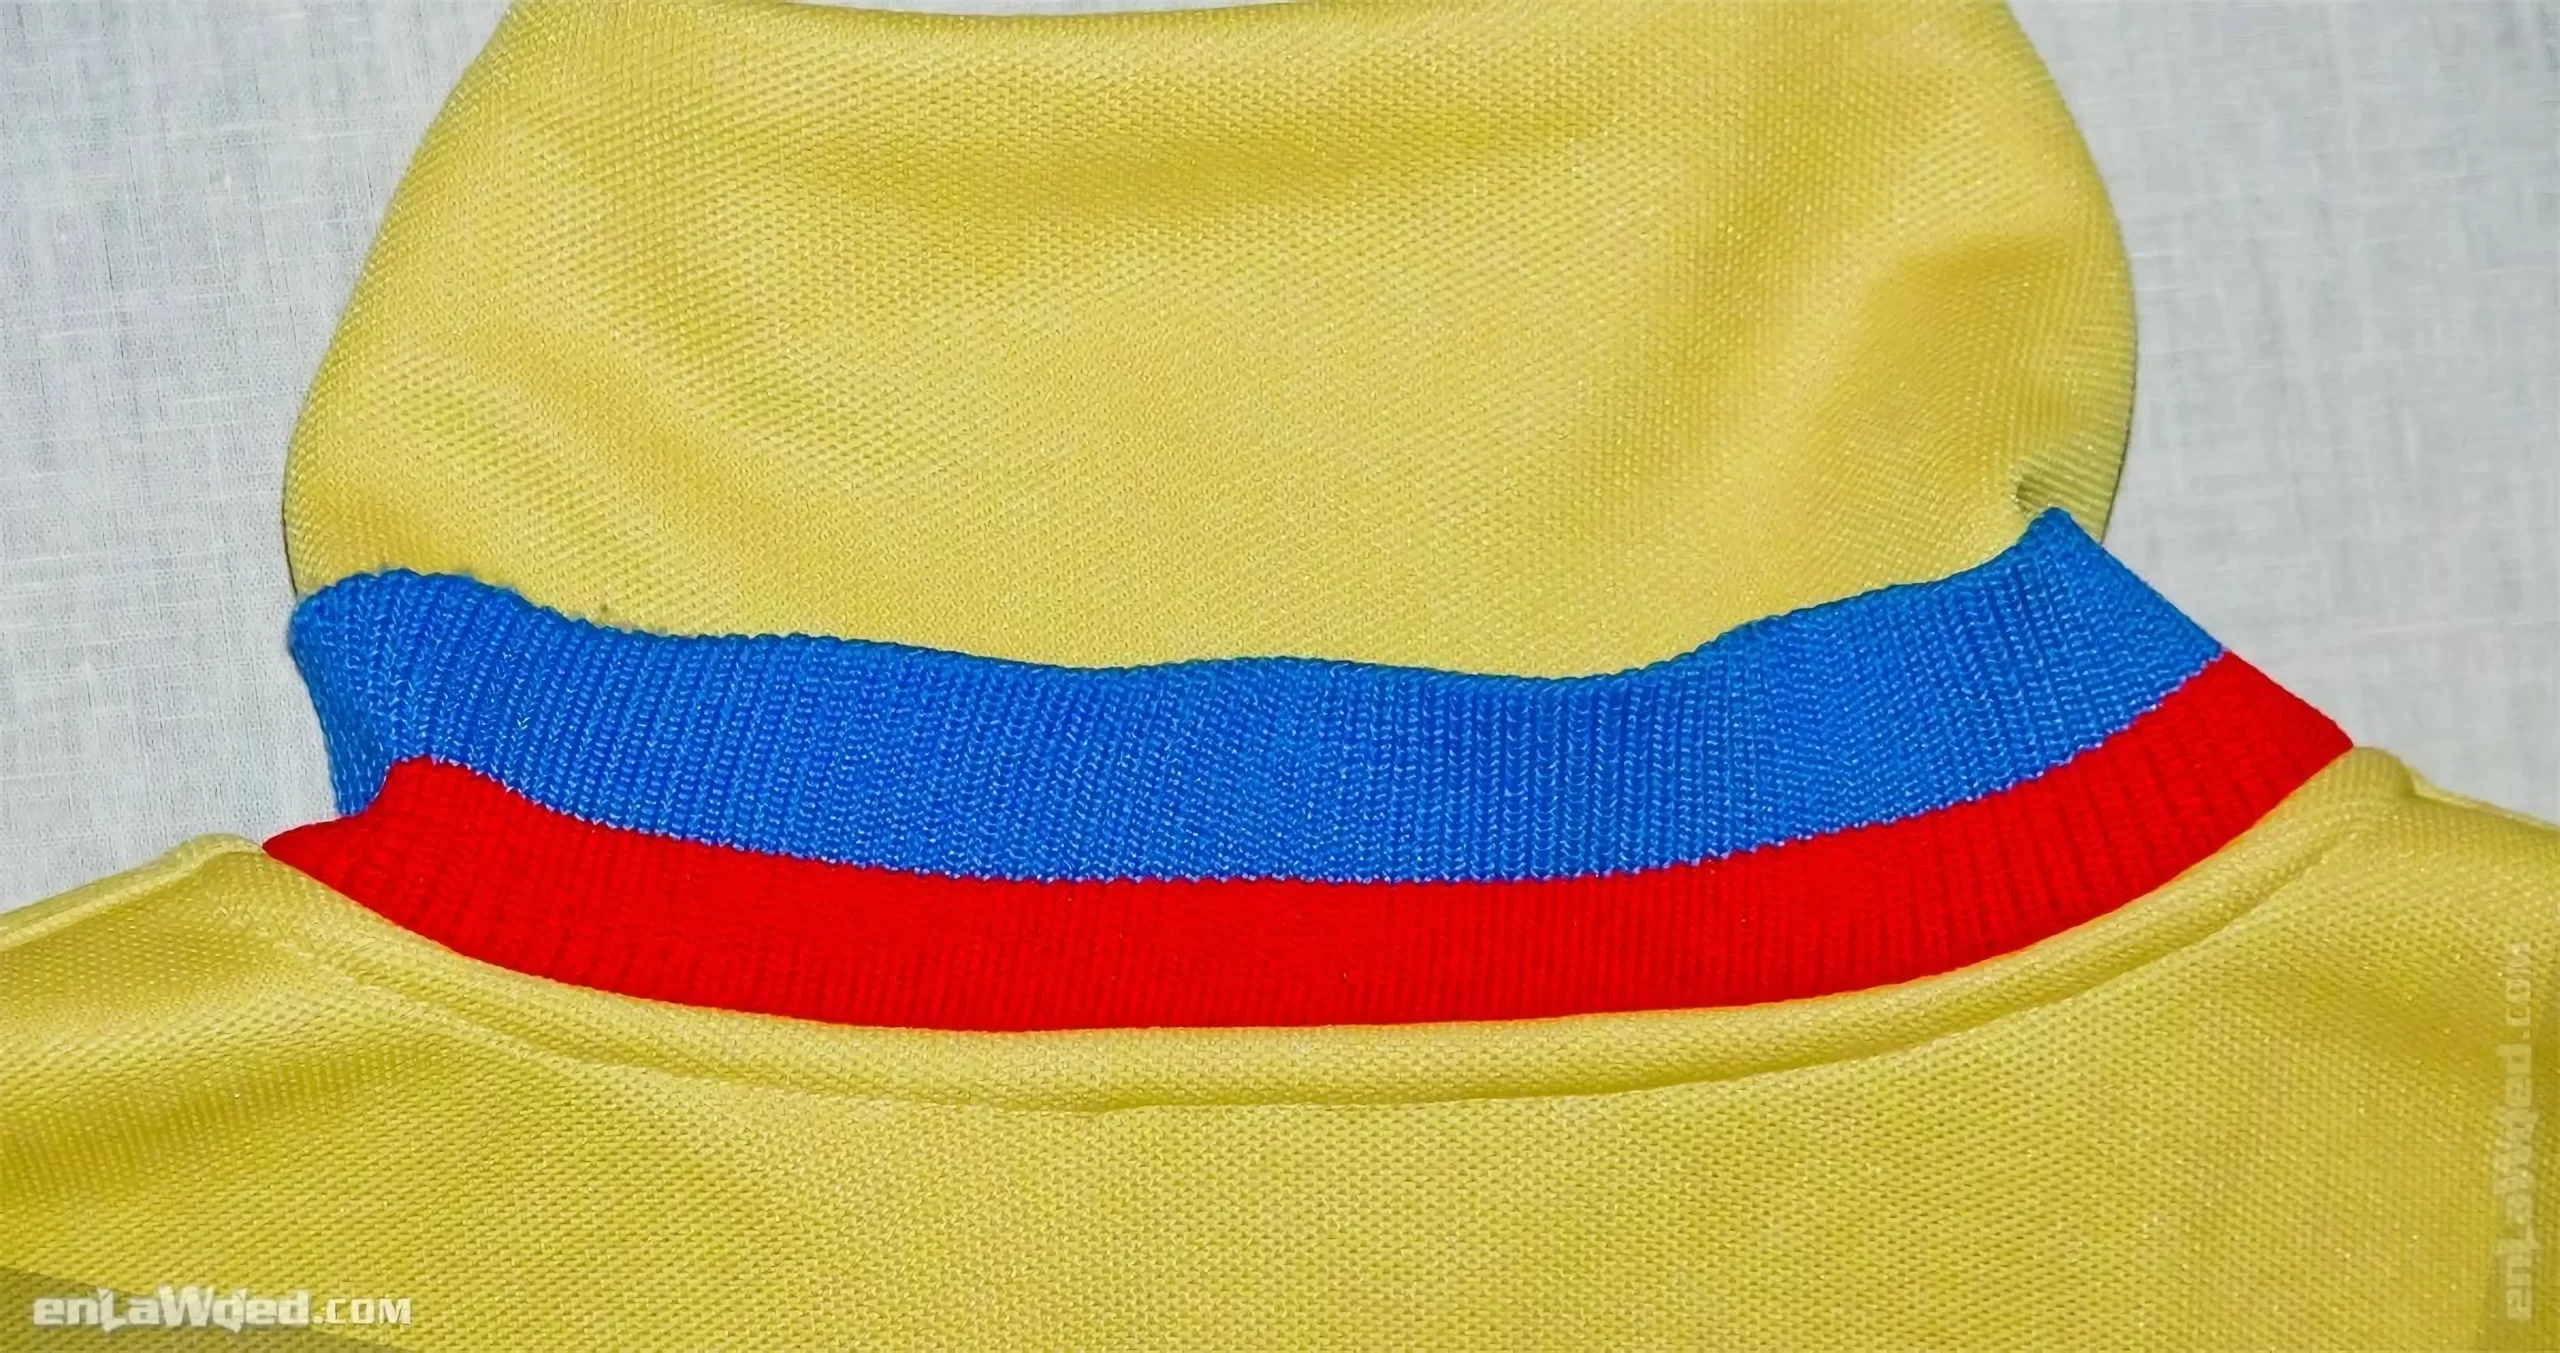 13th interior view of the Adidas Originals Colombia Track Top